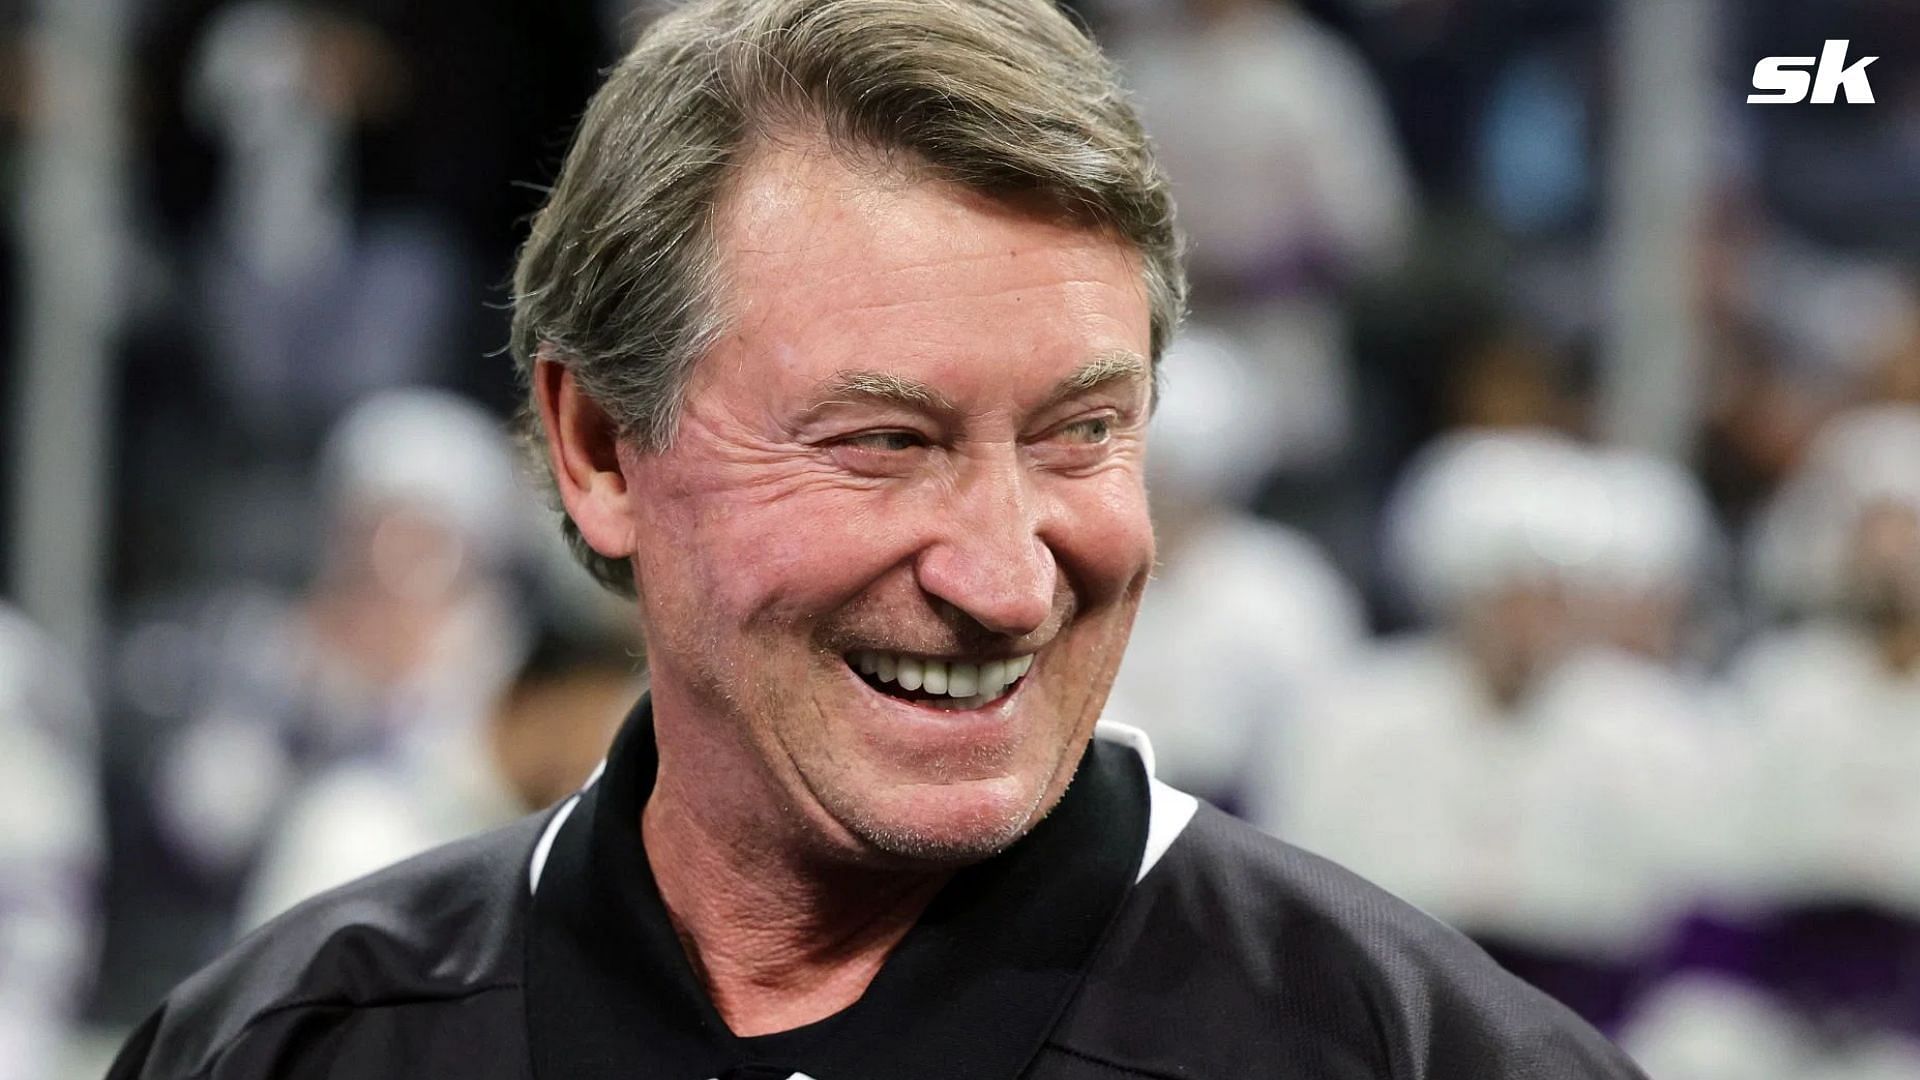 Wayne Gretzky wanted to be 'shortstop for the Detroit Tigers